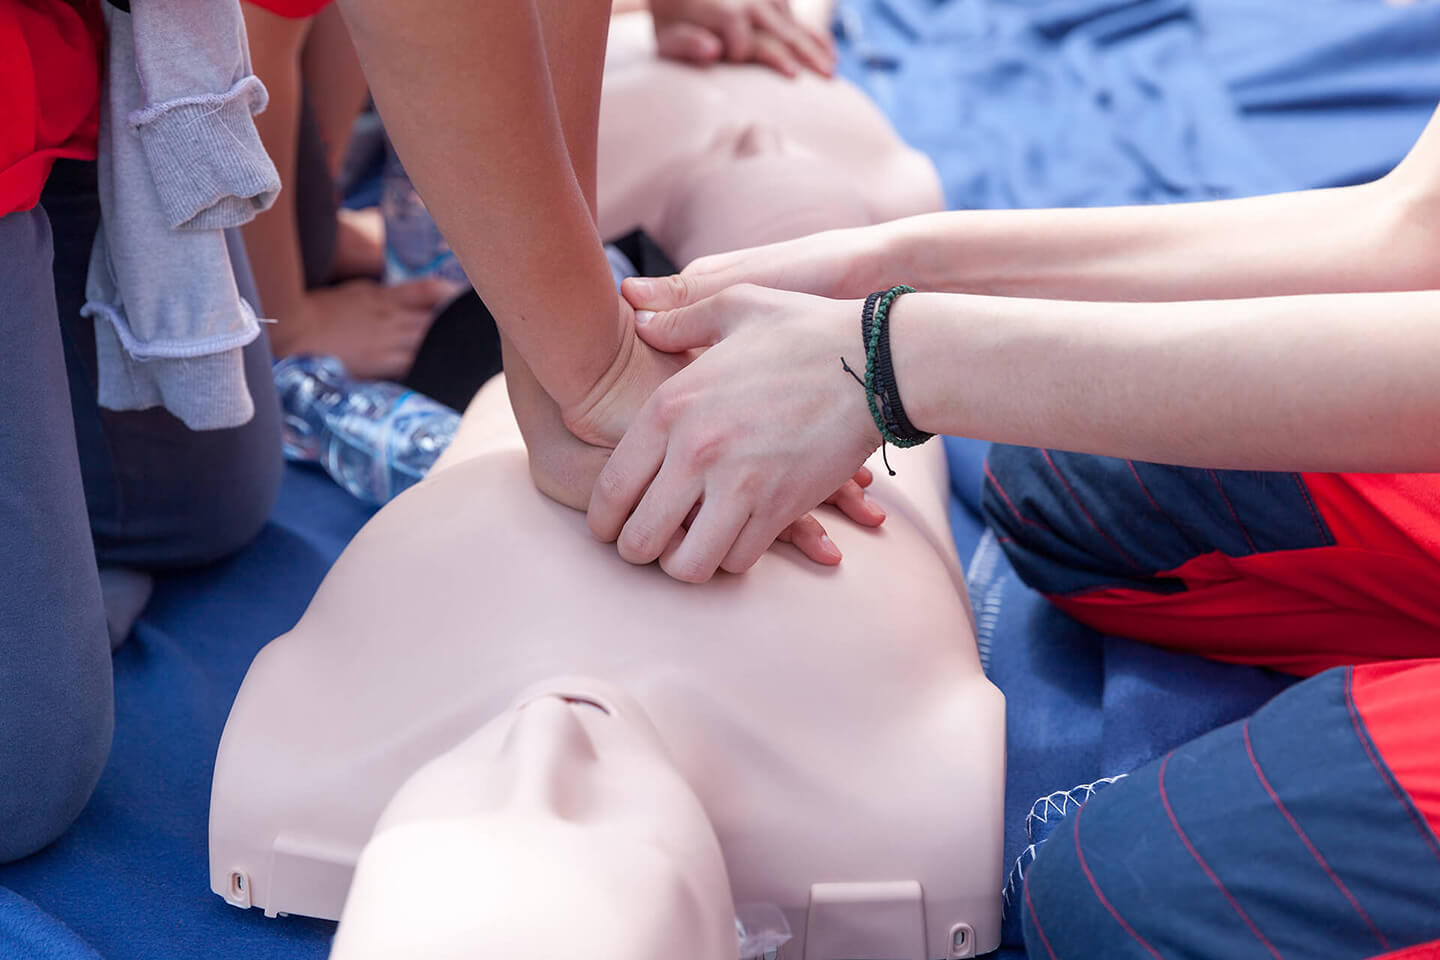 cpr training with a manikin